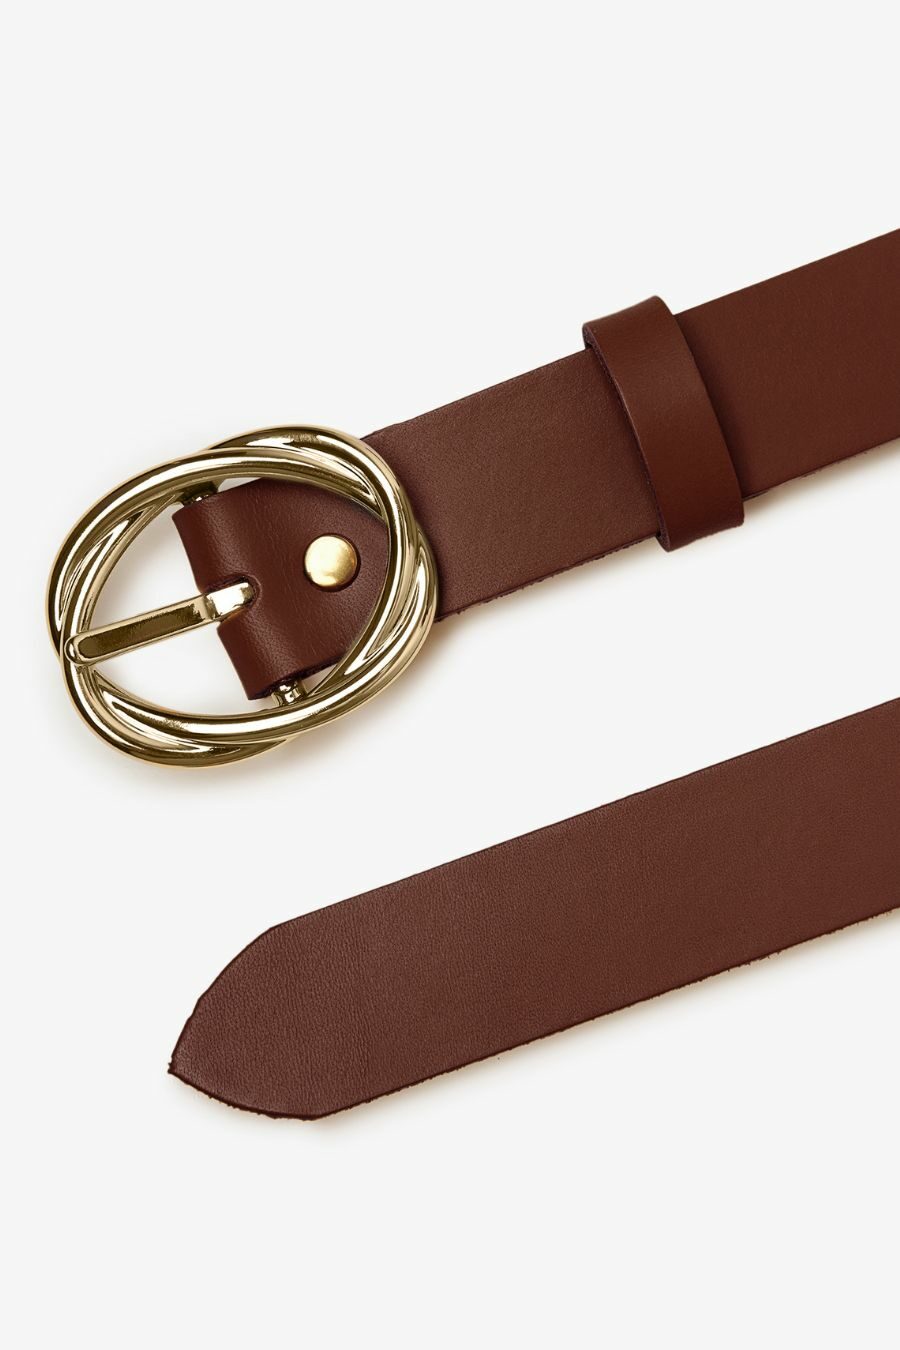 Rita Row Schule brown leather belt round retro buckle | PIPE AND ROW